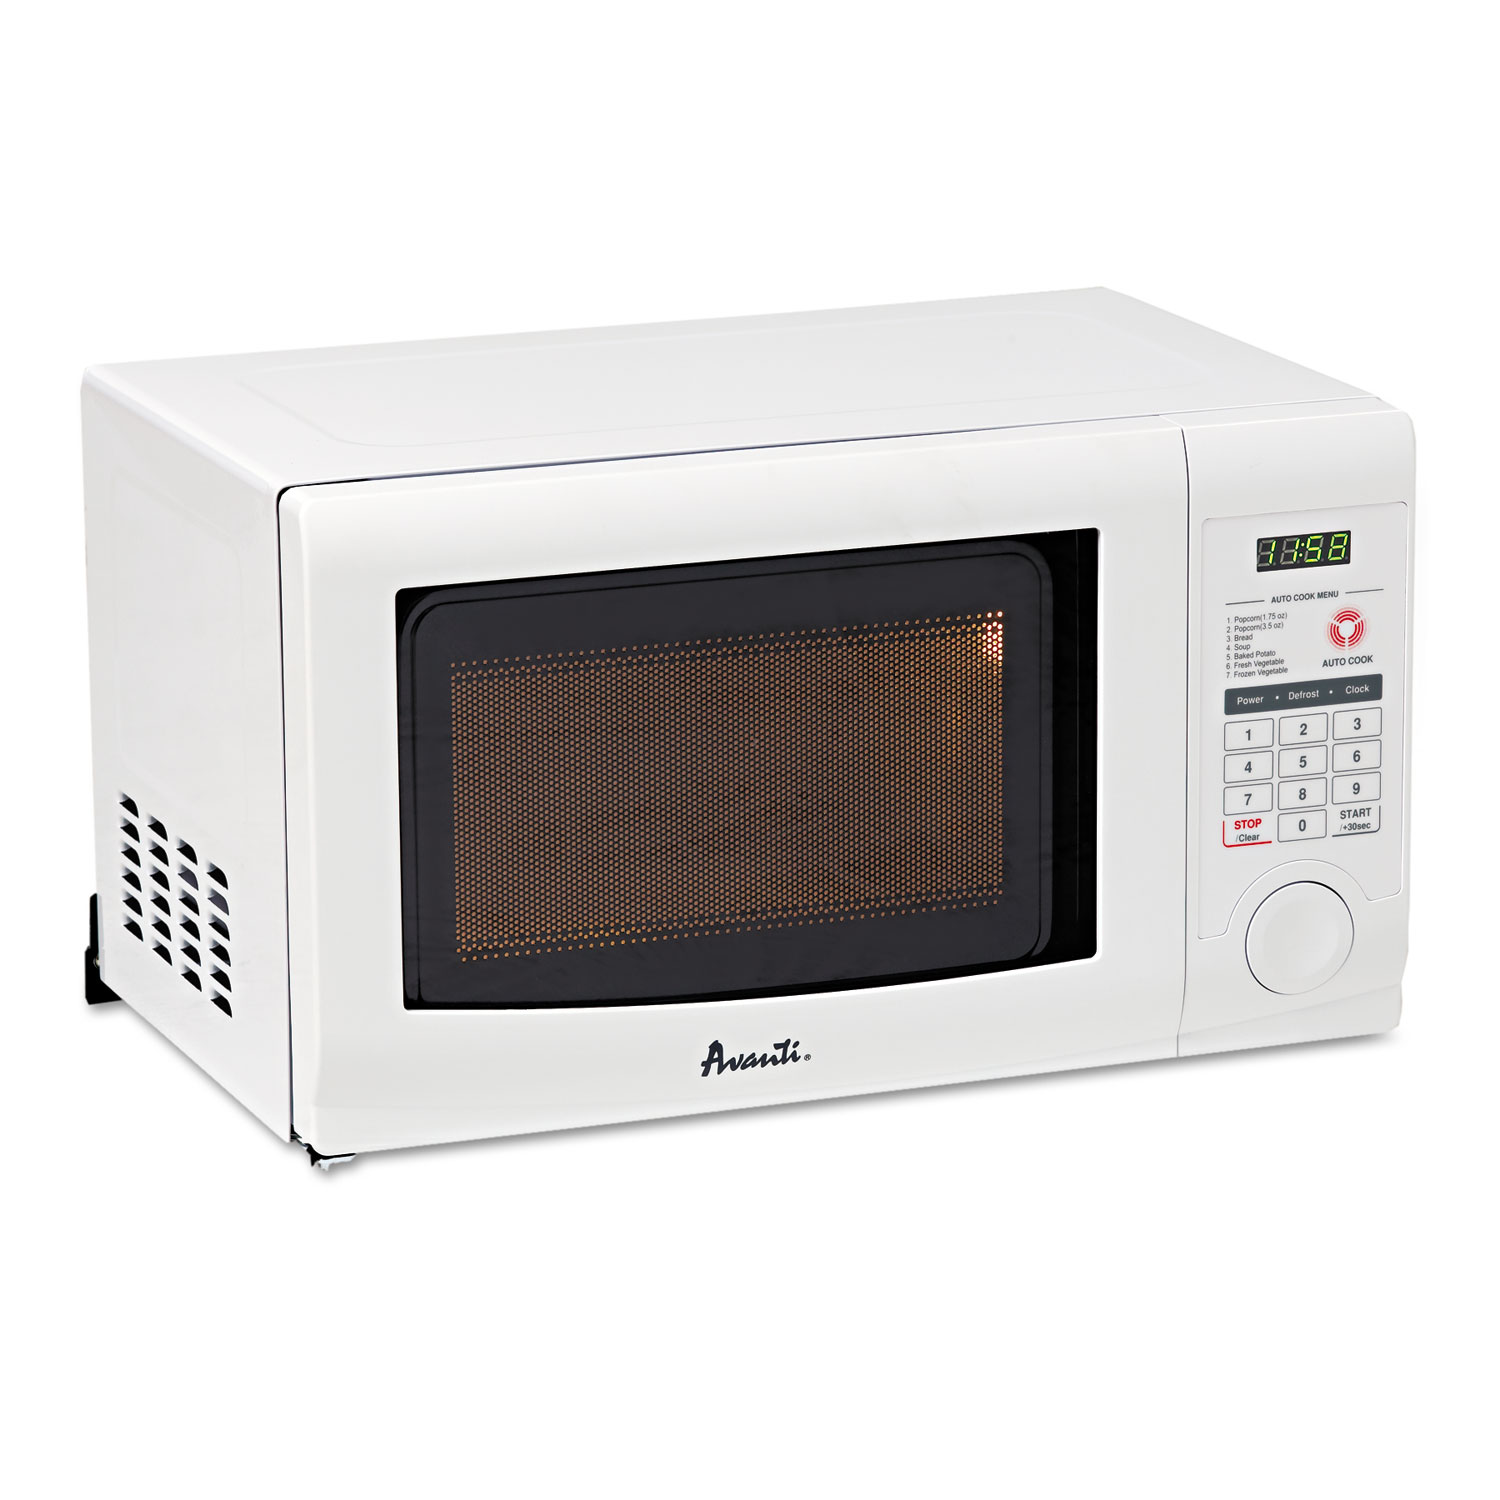 0.7 Cubic Foot Capacity Microwave Oven, 700 Watts, White - image 1 of 2